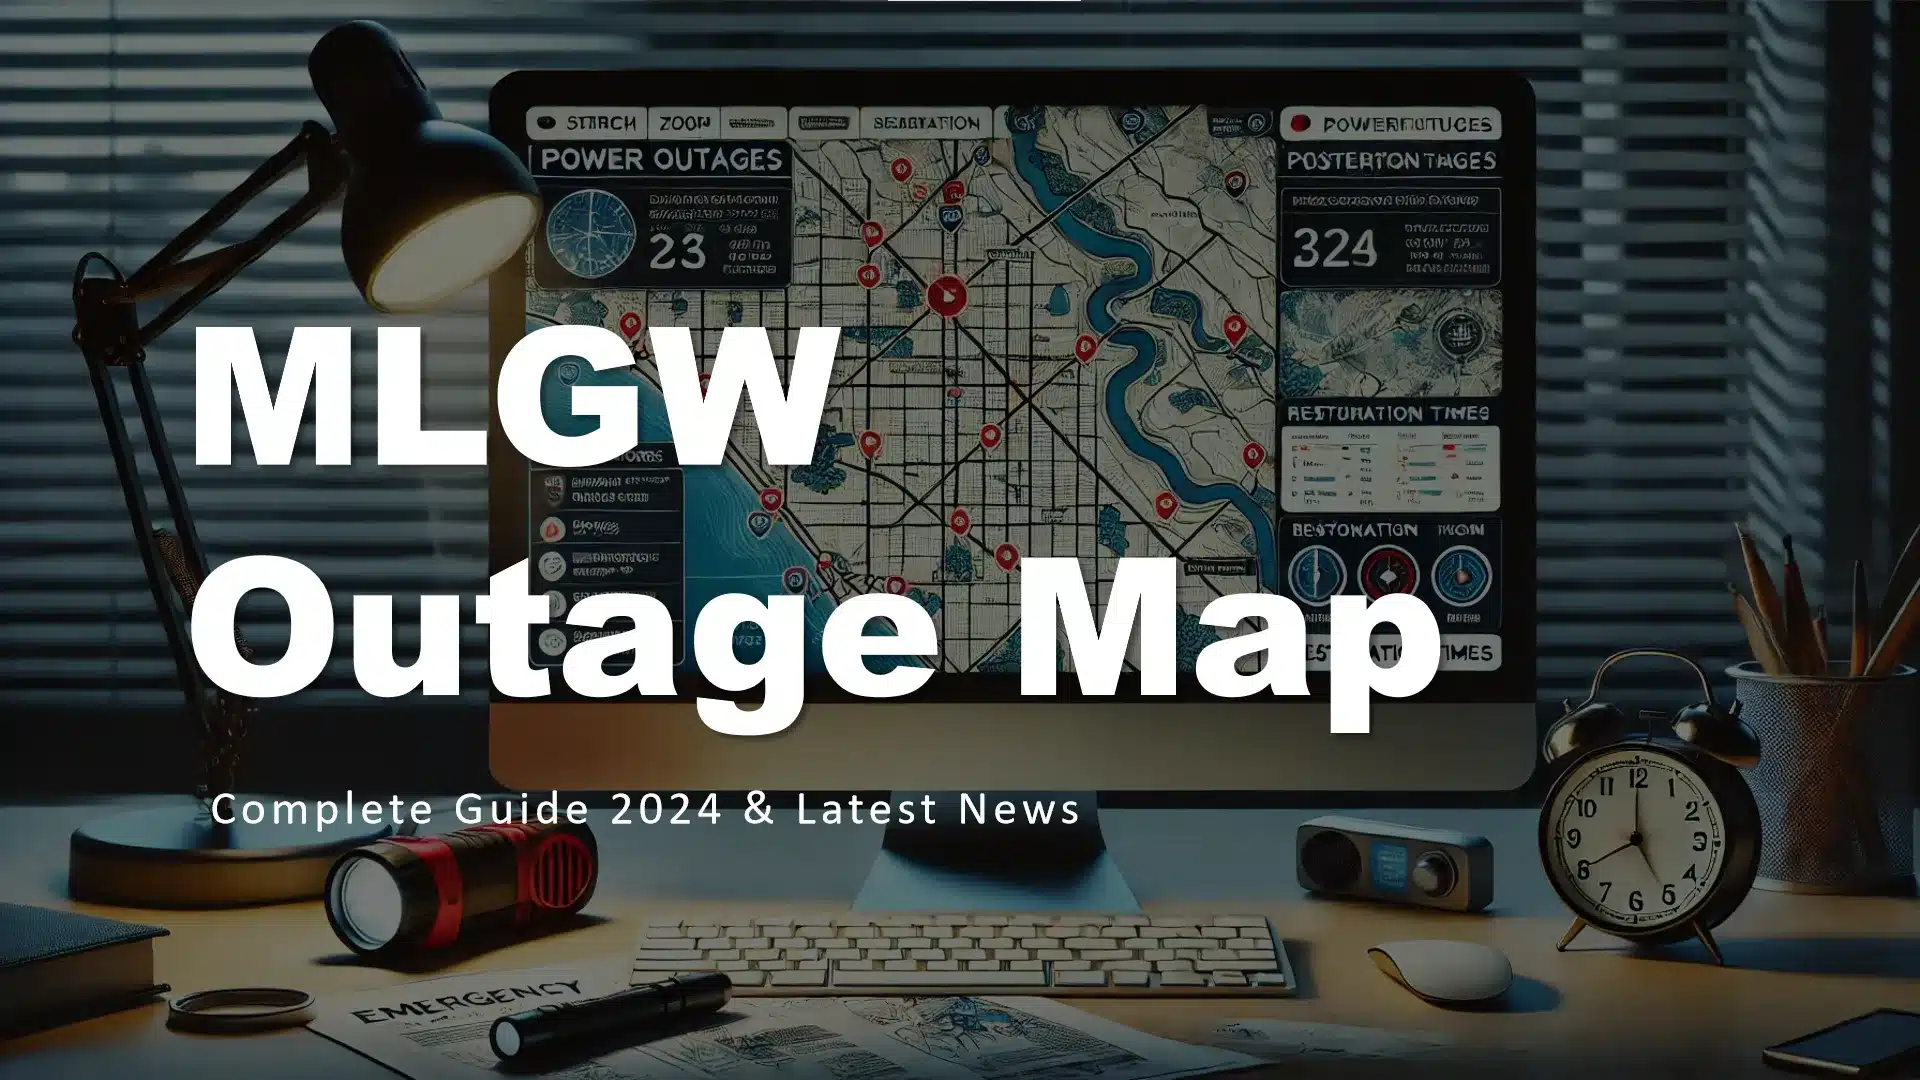 MLGW Outage Map Complete Guide 2024 and Latest News